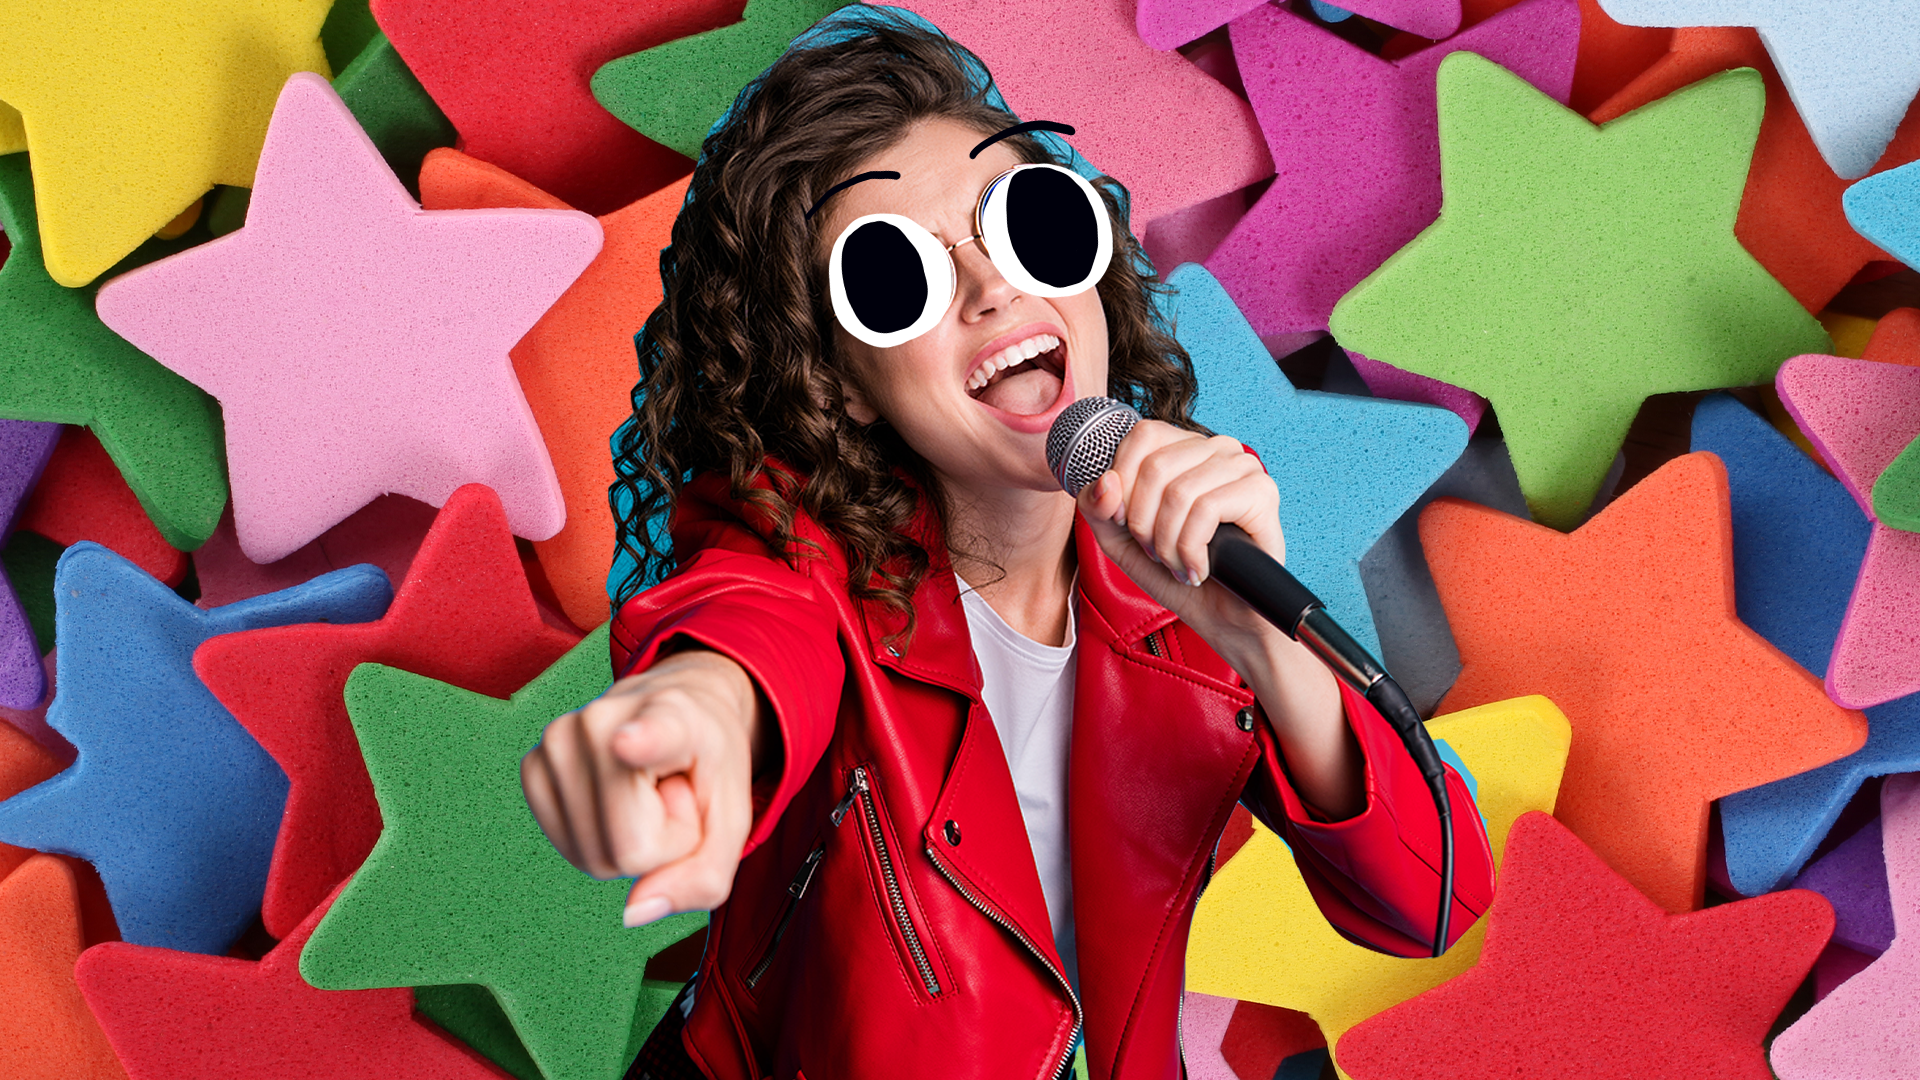 Woman singing on colourful star background